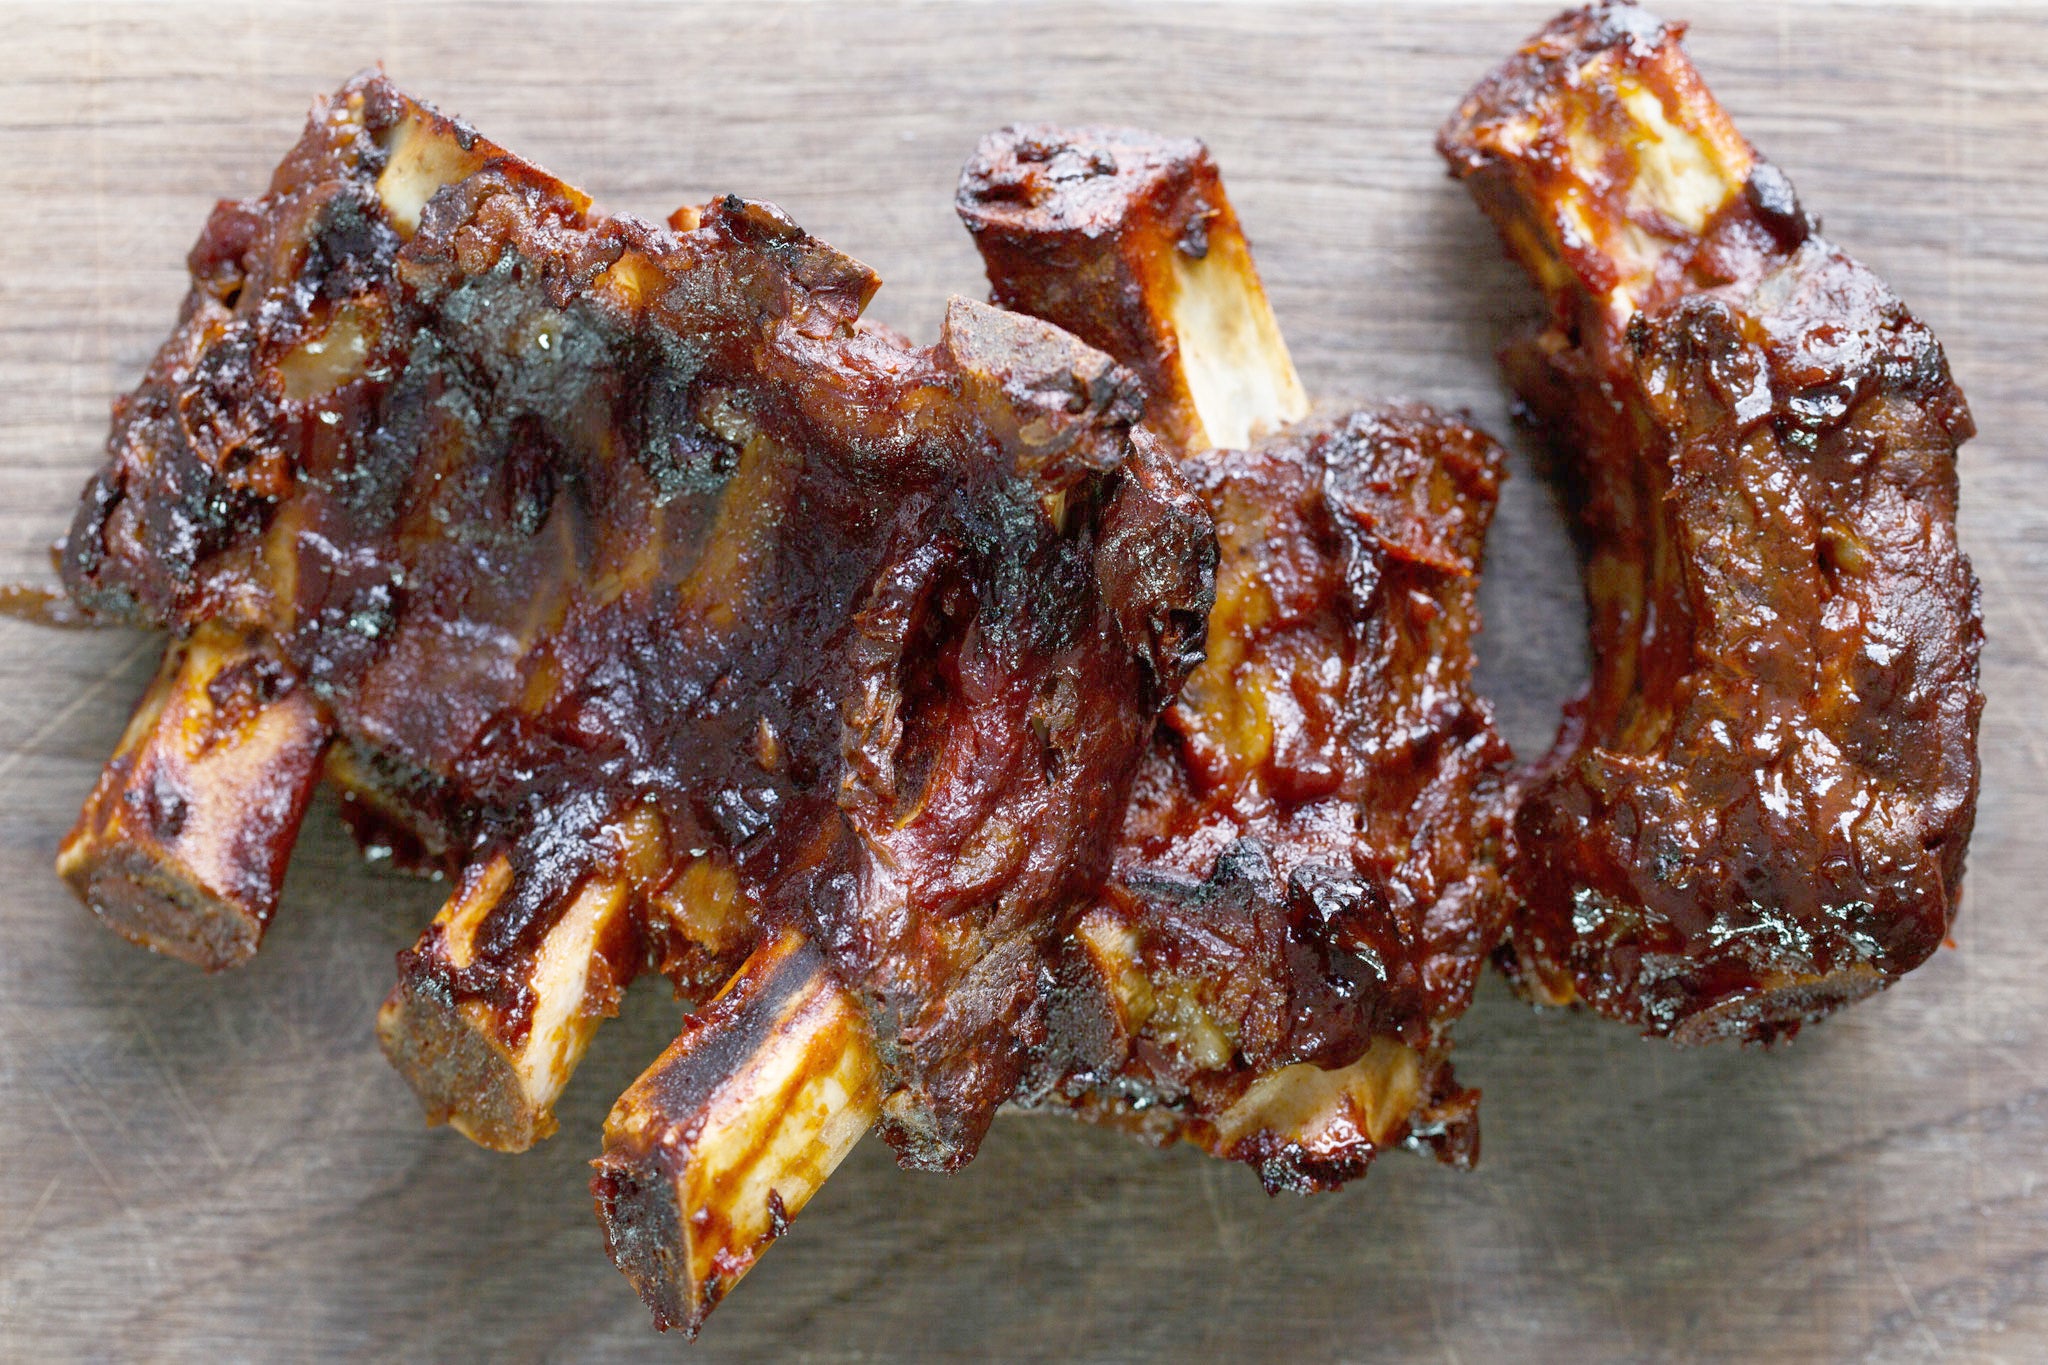 Serve Mark's beef ribs with a salad, coleslaw and maybe some potato wedges cooked in the oven